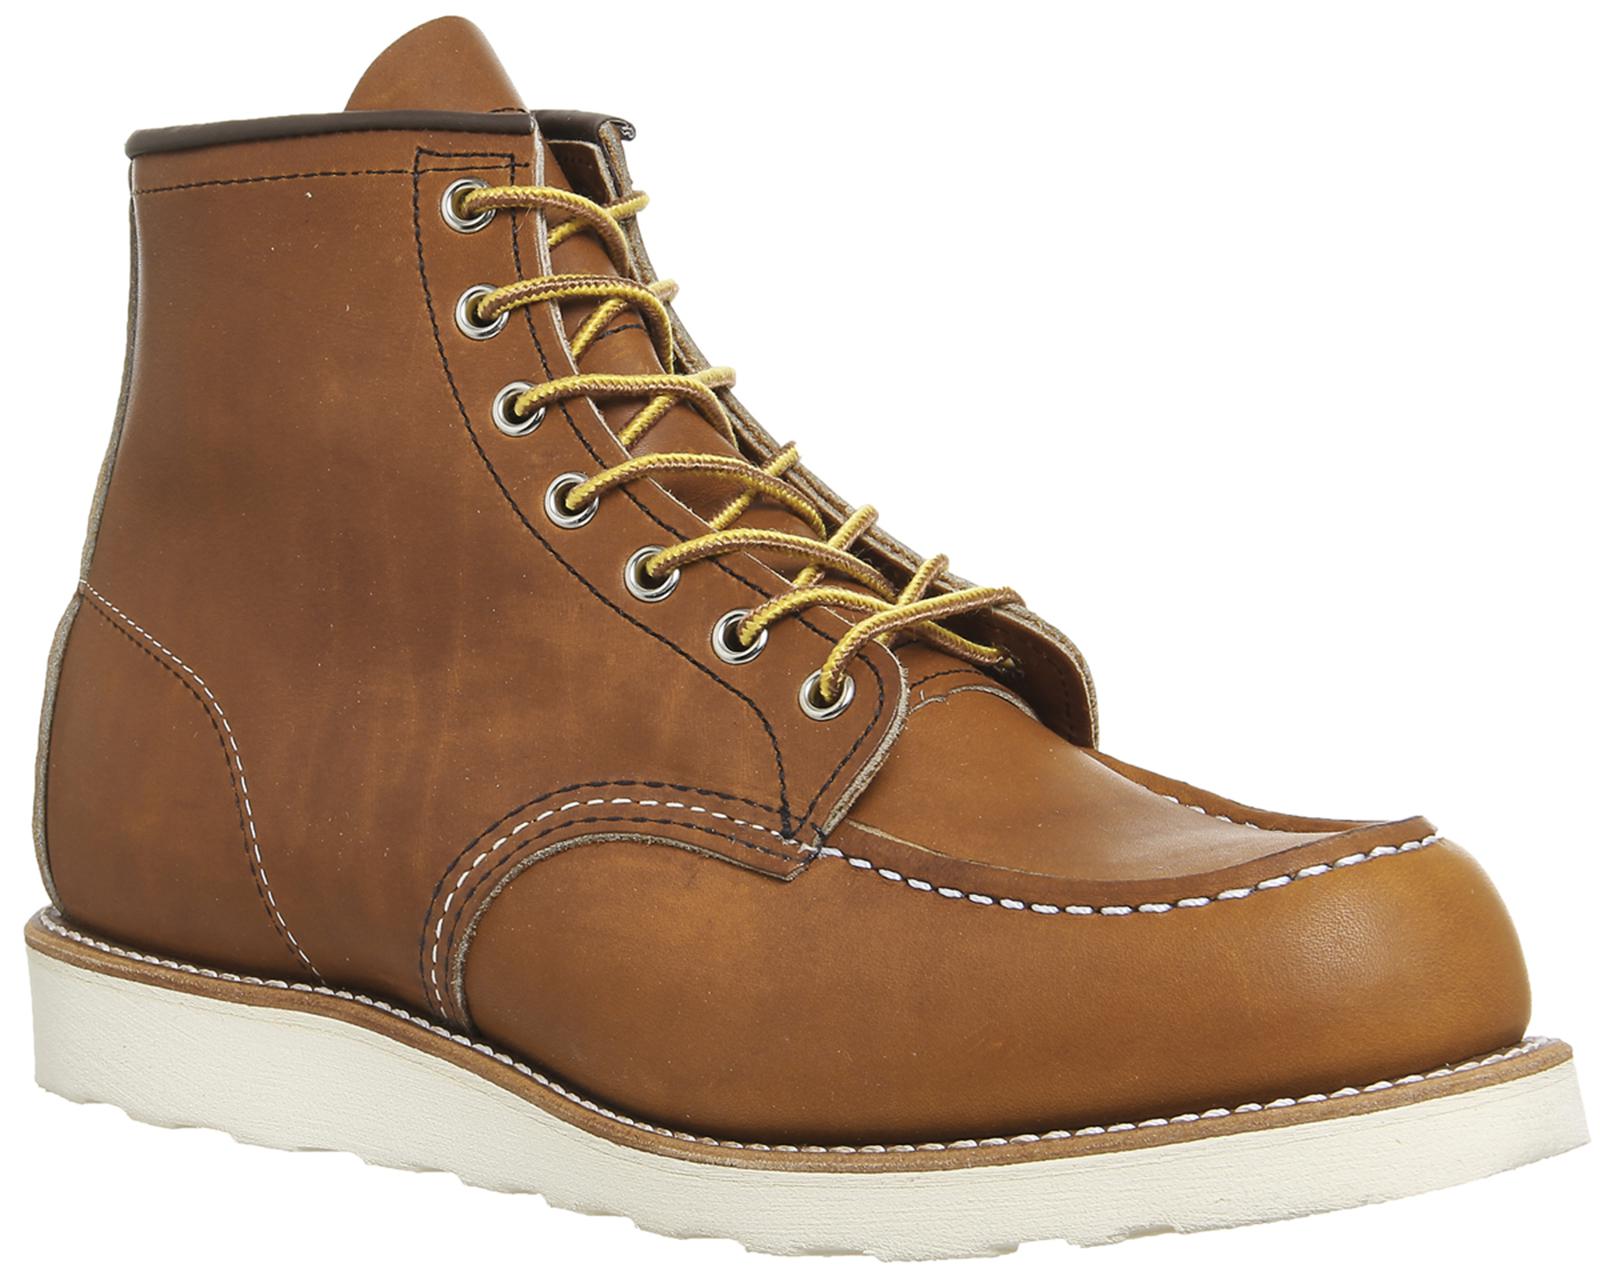 Red Wing Work Wedge Boots in Brown for Men - Lyst